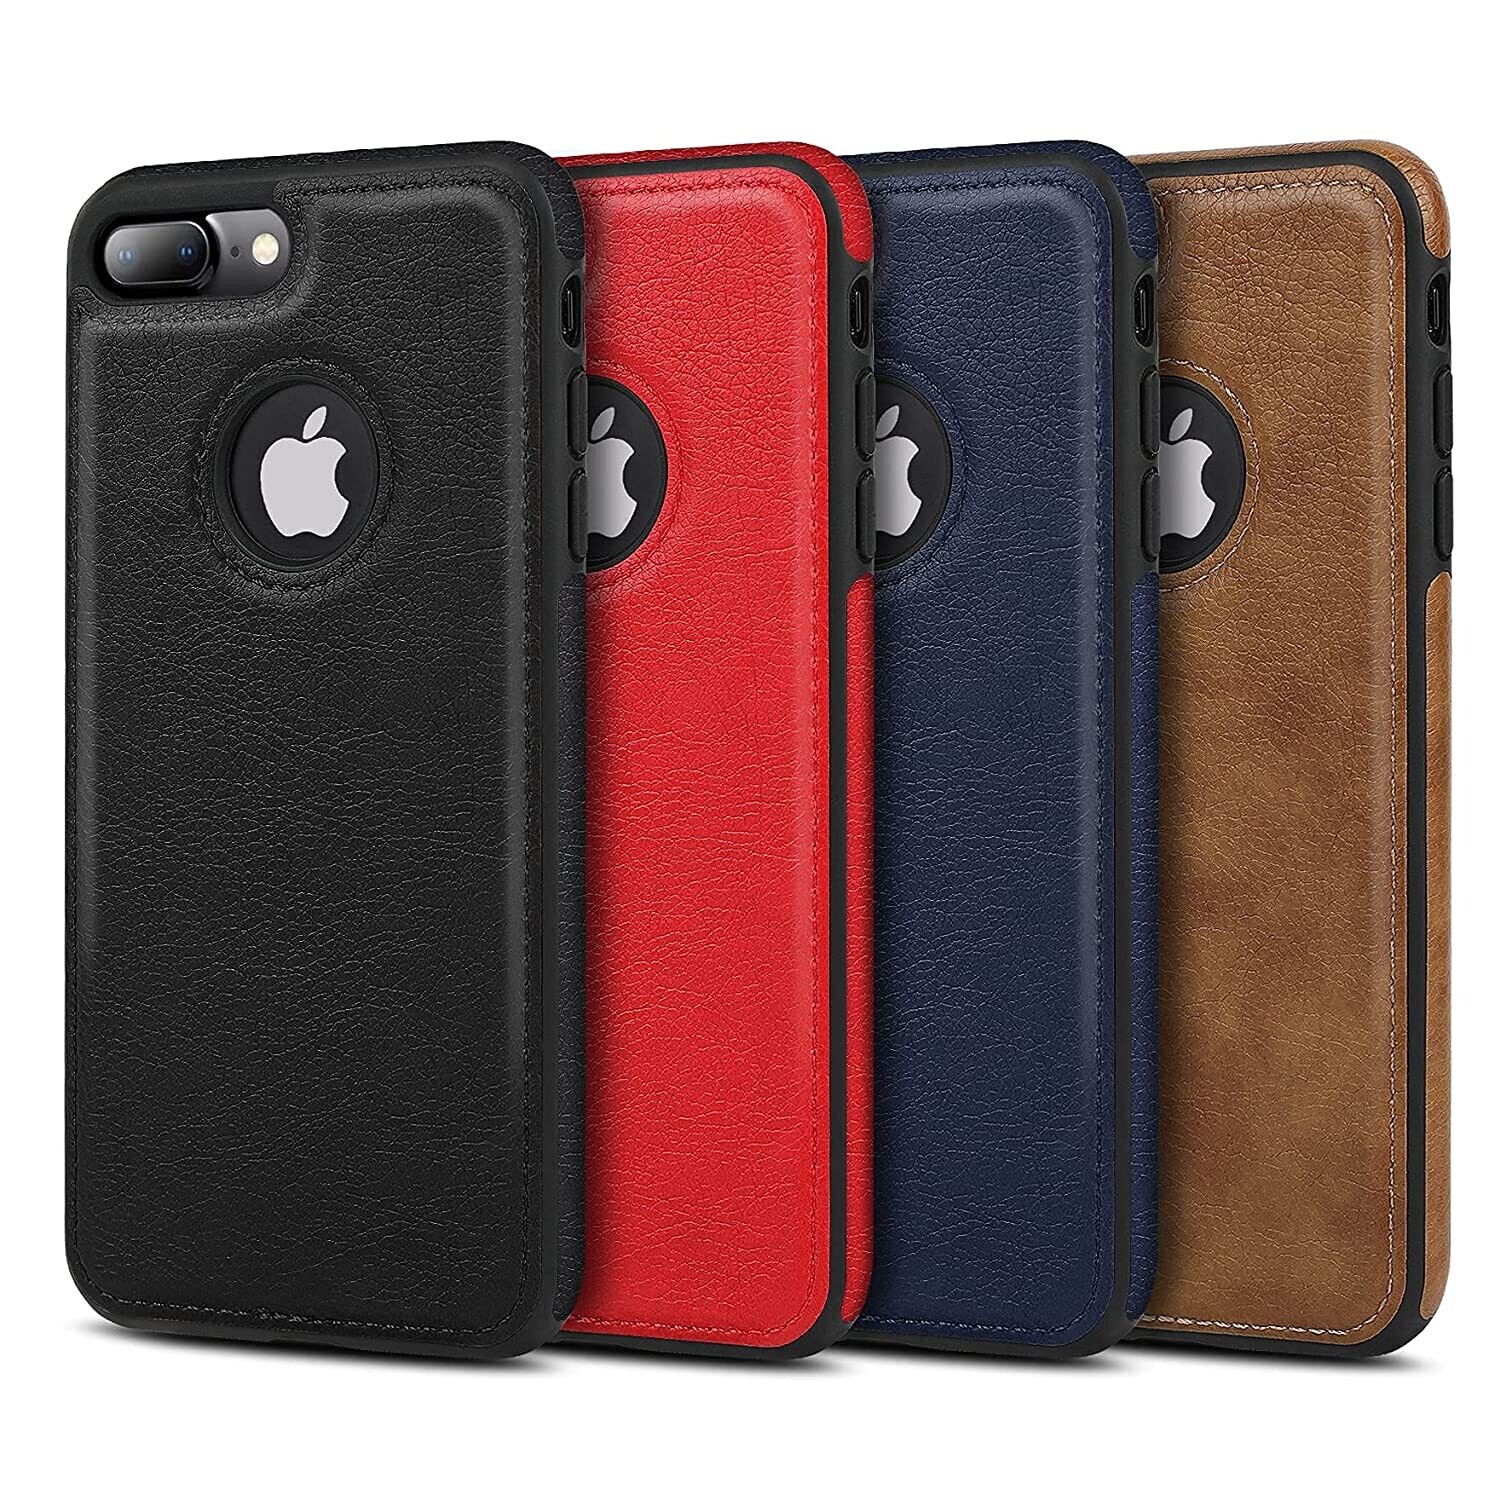 iPhone 7 Plus iPhone 8 Plus Luxury PU Leather Shockproof Business Style Mobile Phone Case